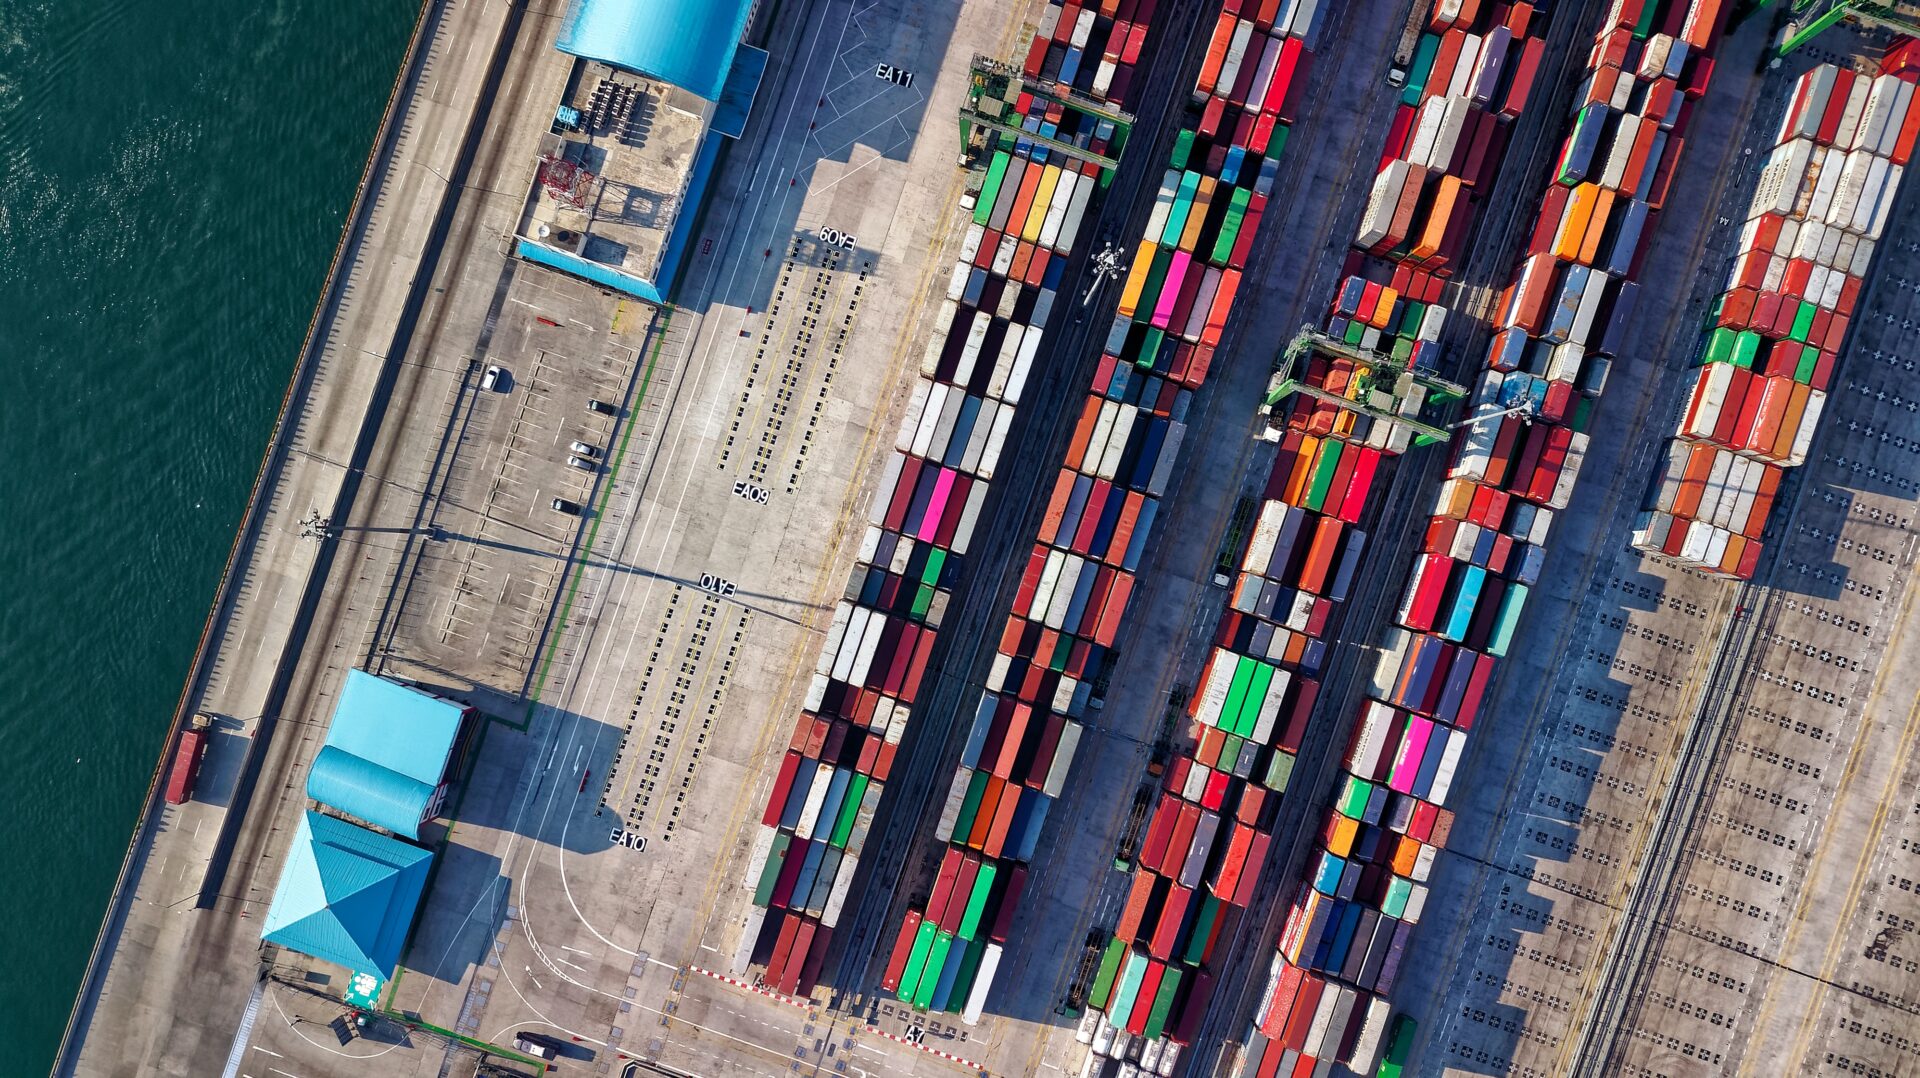 Findings use case sharing freight transport data with Insurers